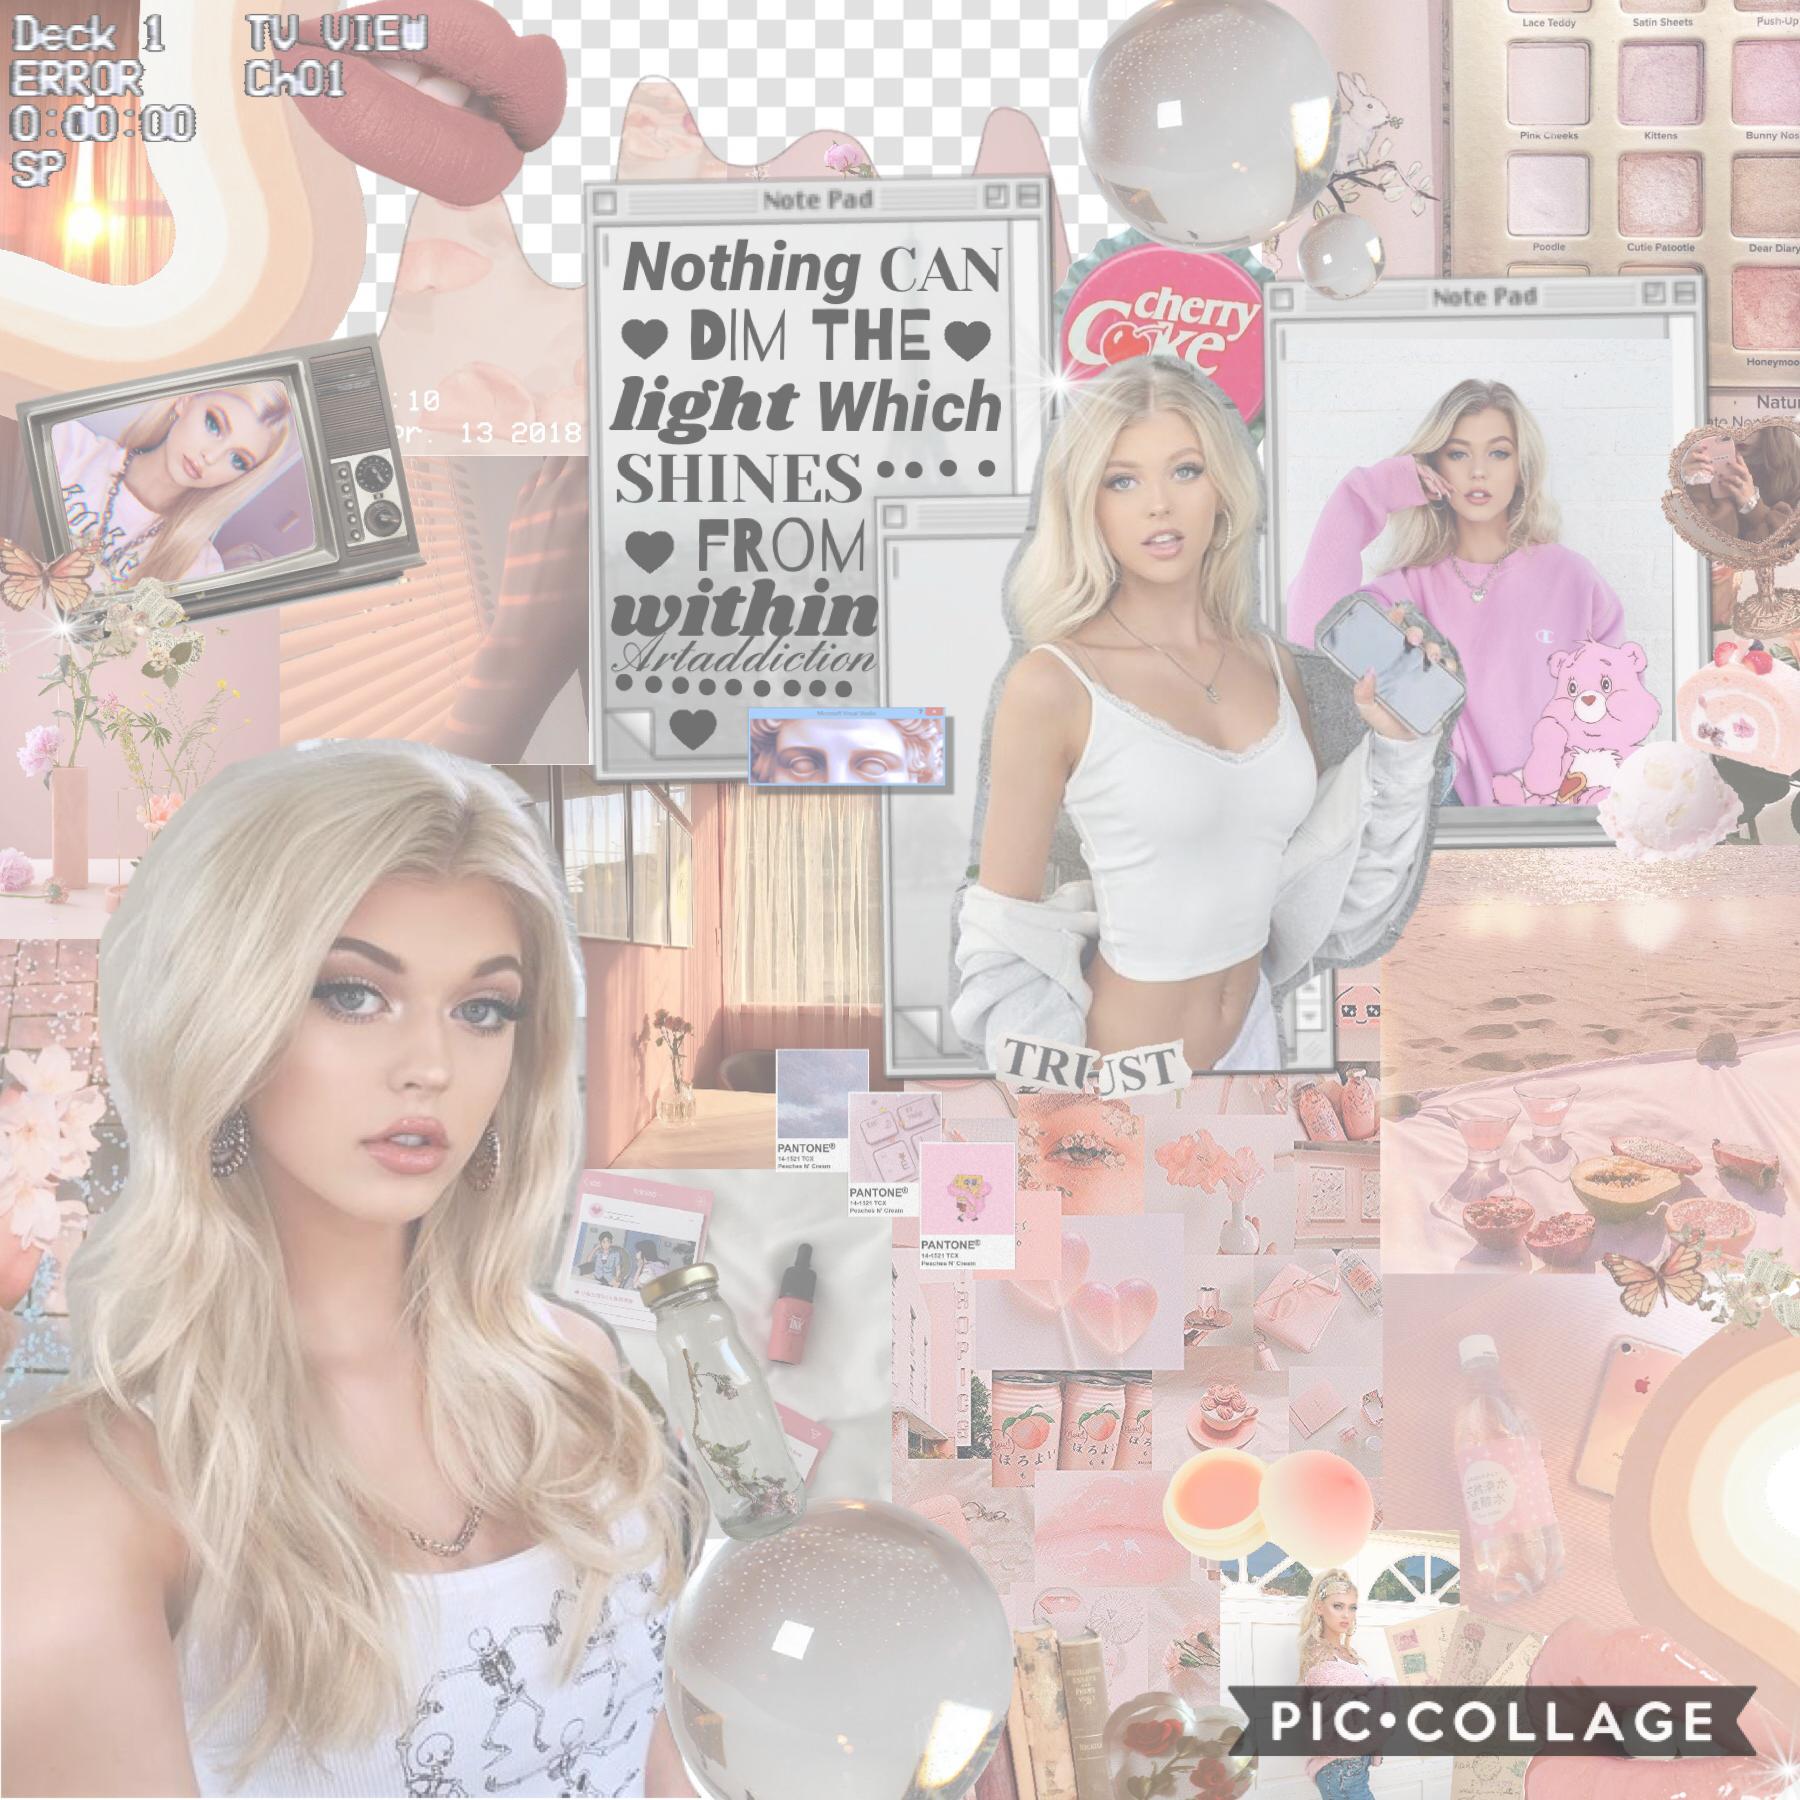 Hey artaddicts trust me this is my last collage for the day 😂 lol I just wanted to do this one as an idea popped in my head and I did it quite quick so might be a lil crowded but I hope u like it. I’ll see u guys soon, the next time I post will probs be a